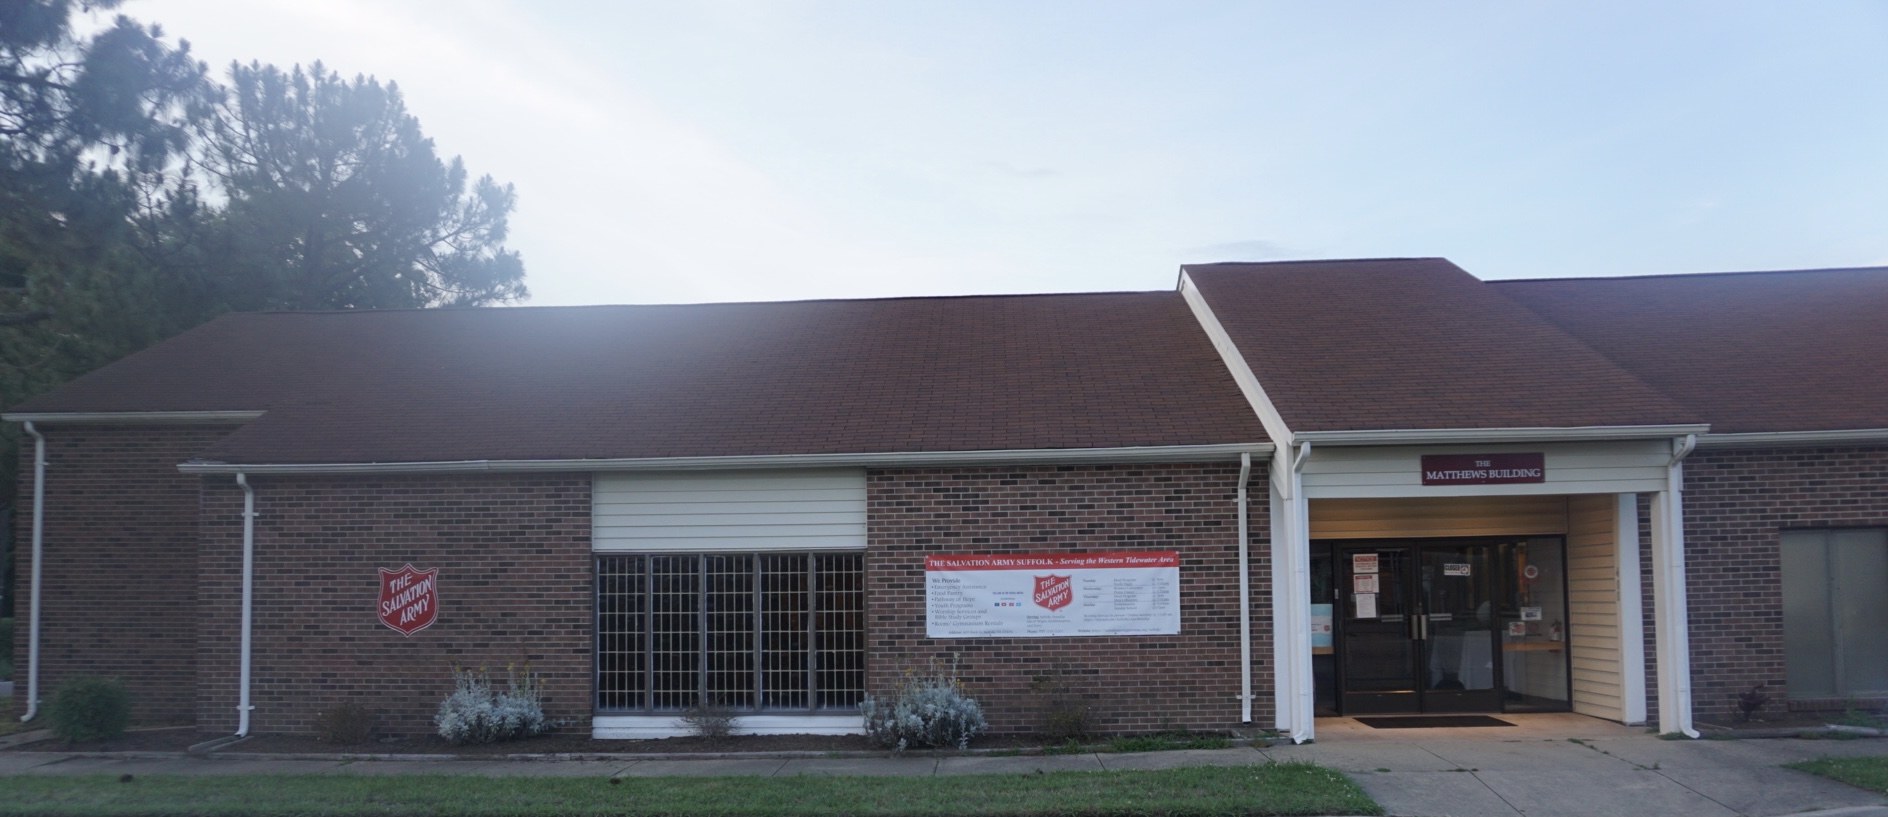 The Salvation Army Corps & Community Center of Suffolk ,Virginia